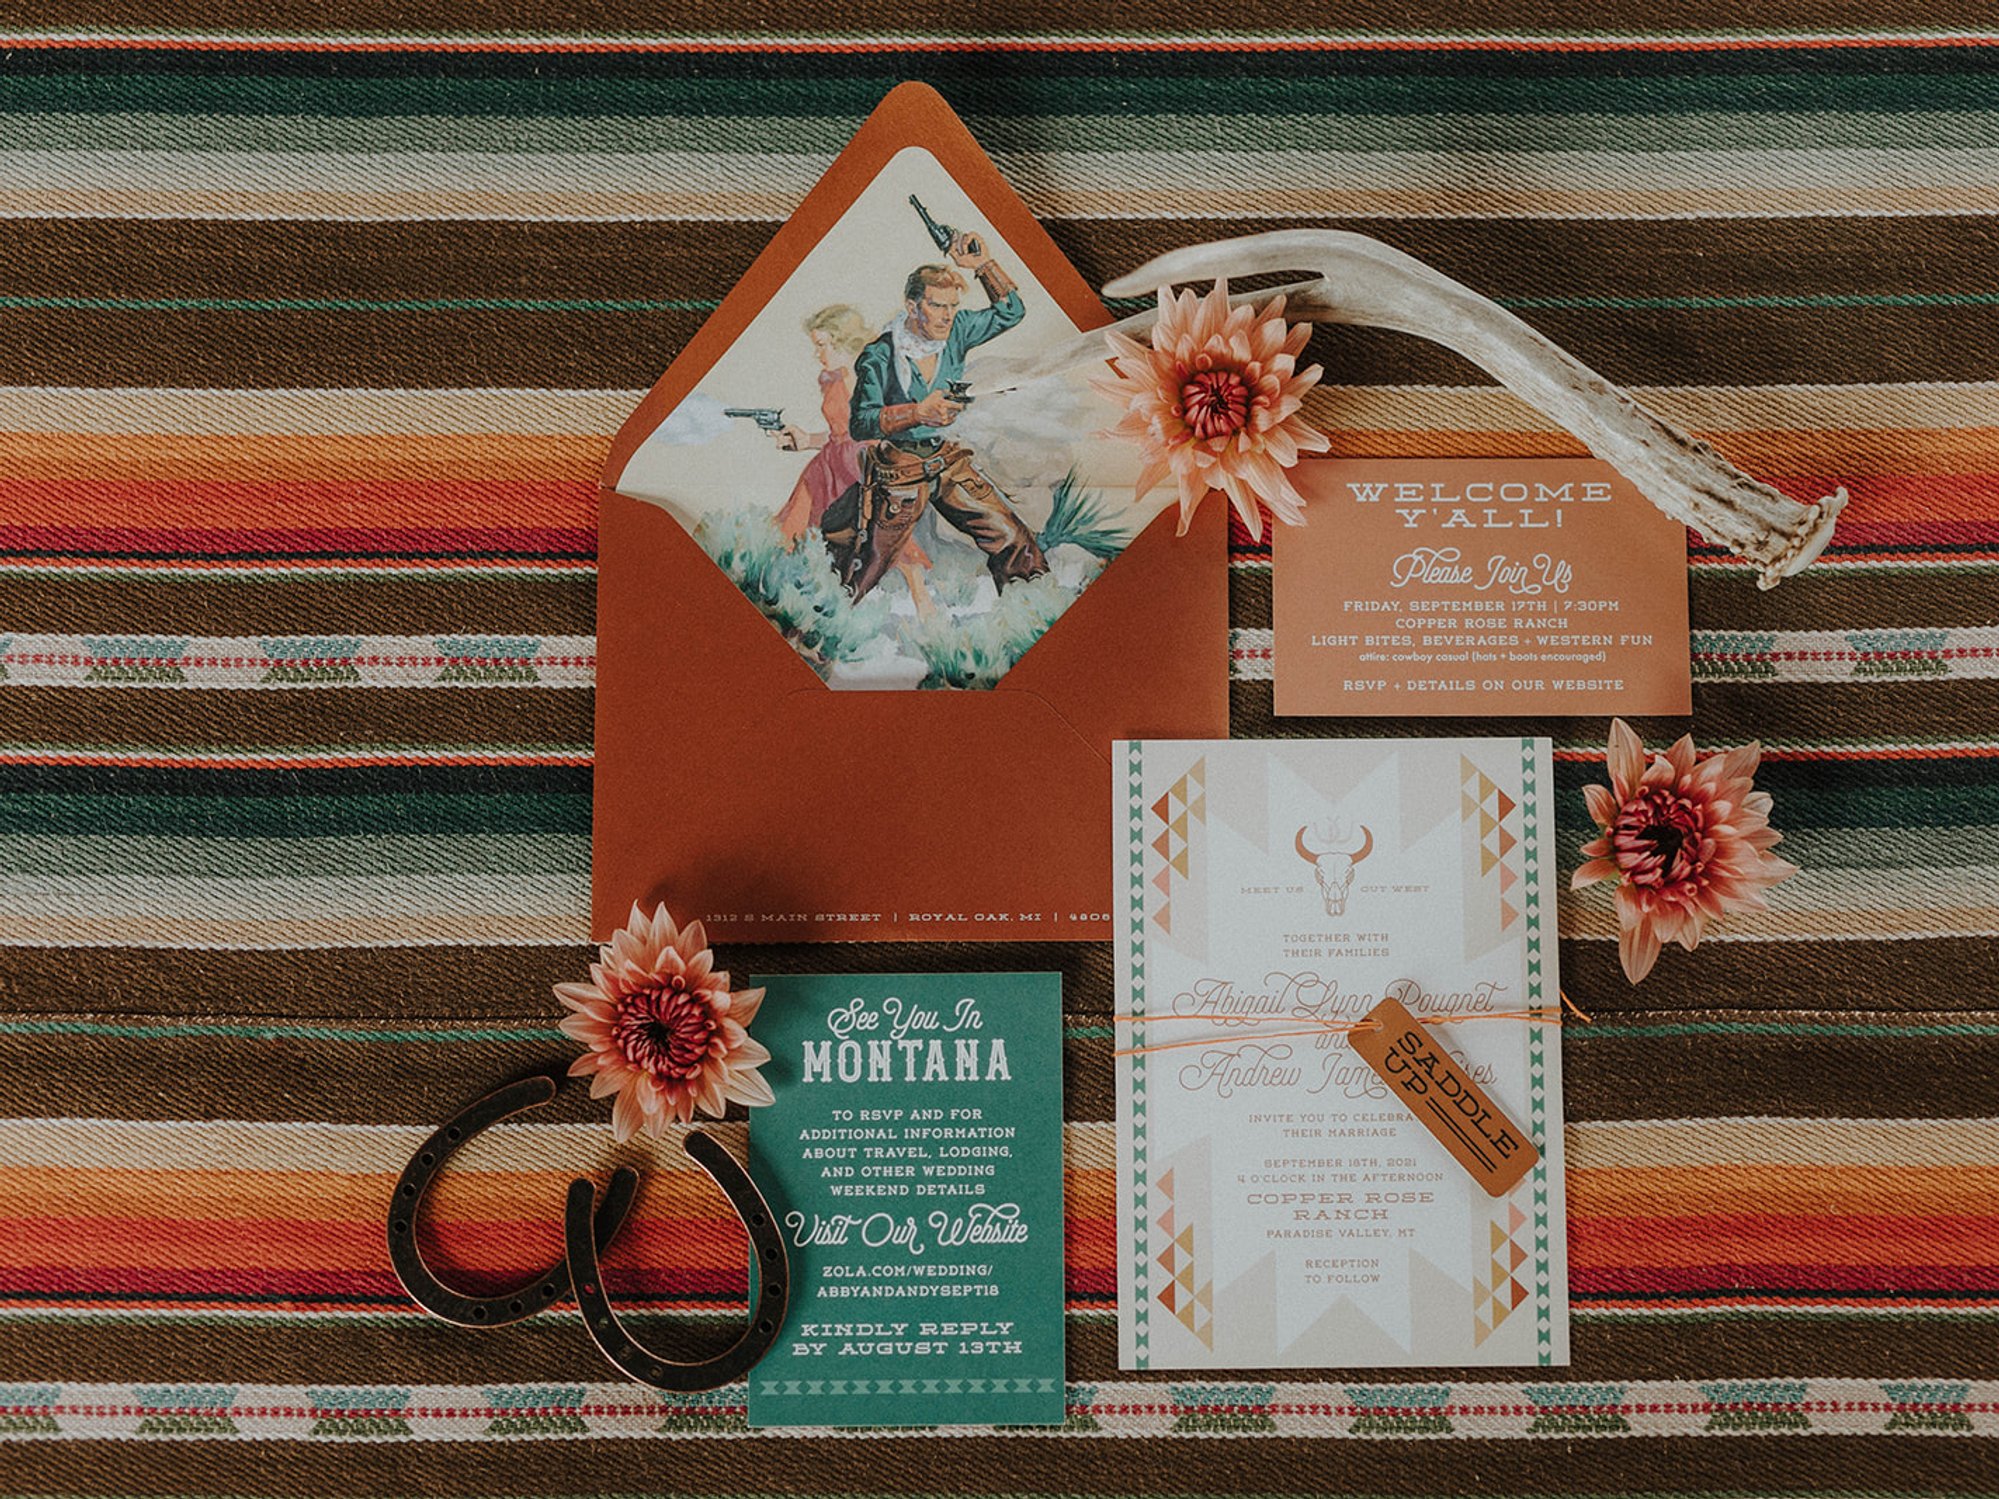 Gorgeous wedding invitation suite with western design for wedding in Bozeman, Montana.